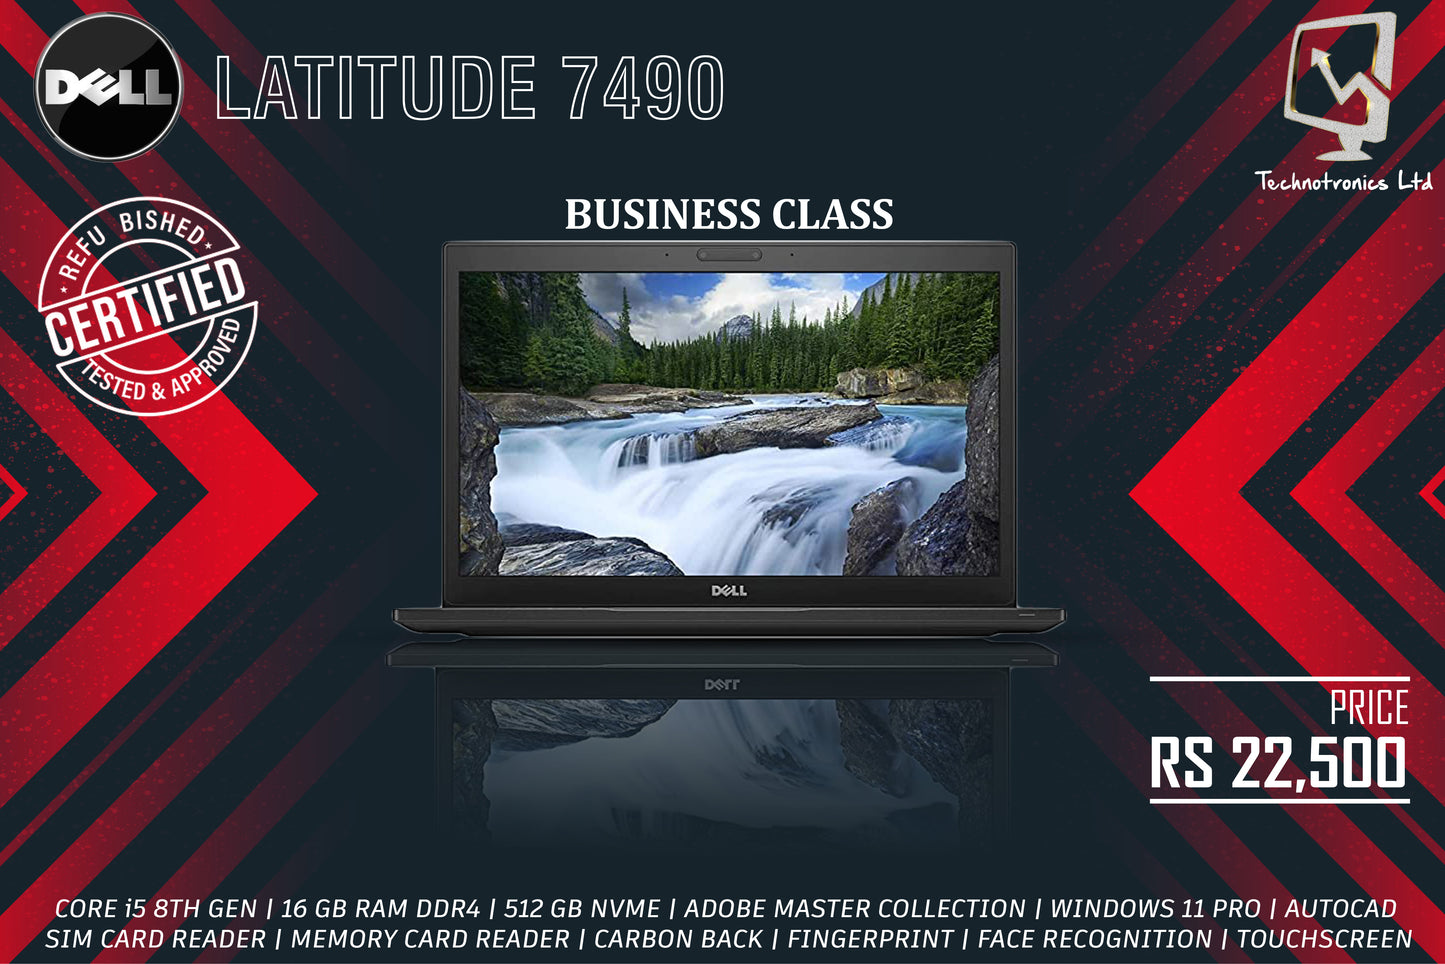 BUSINESS CLASS LAPTOP DELL LATITUDE 7490 CORE I5 (Touch Screen)-16 GB RAM -512 GB NVME FOR SALE (RENEWED)